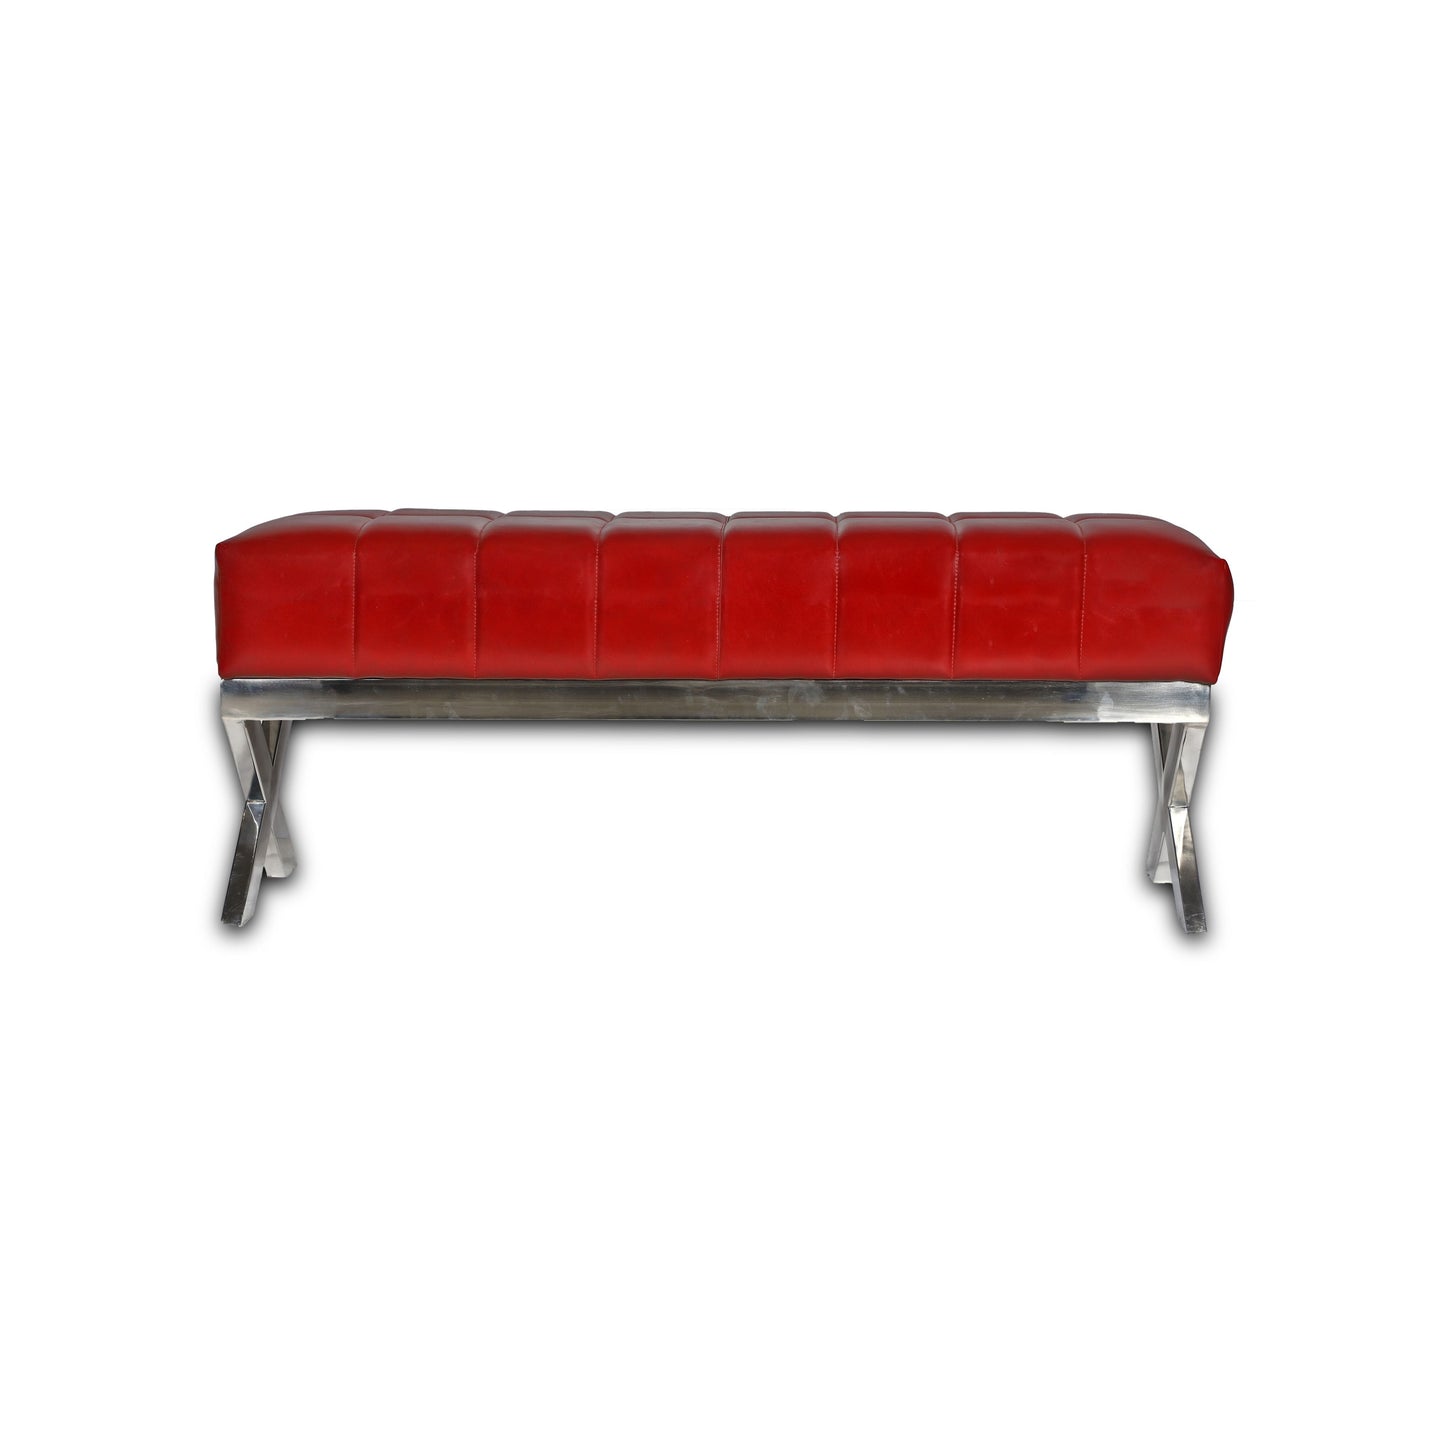 Genuine Leather Cushioned Bench In Red Colour